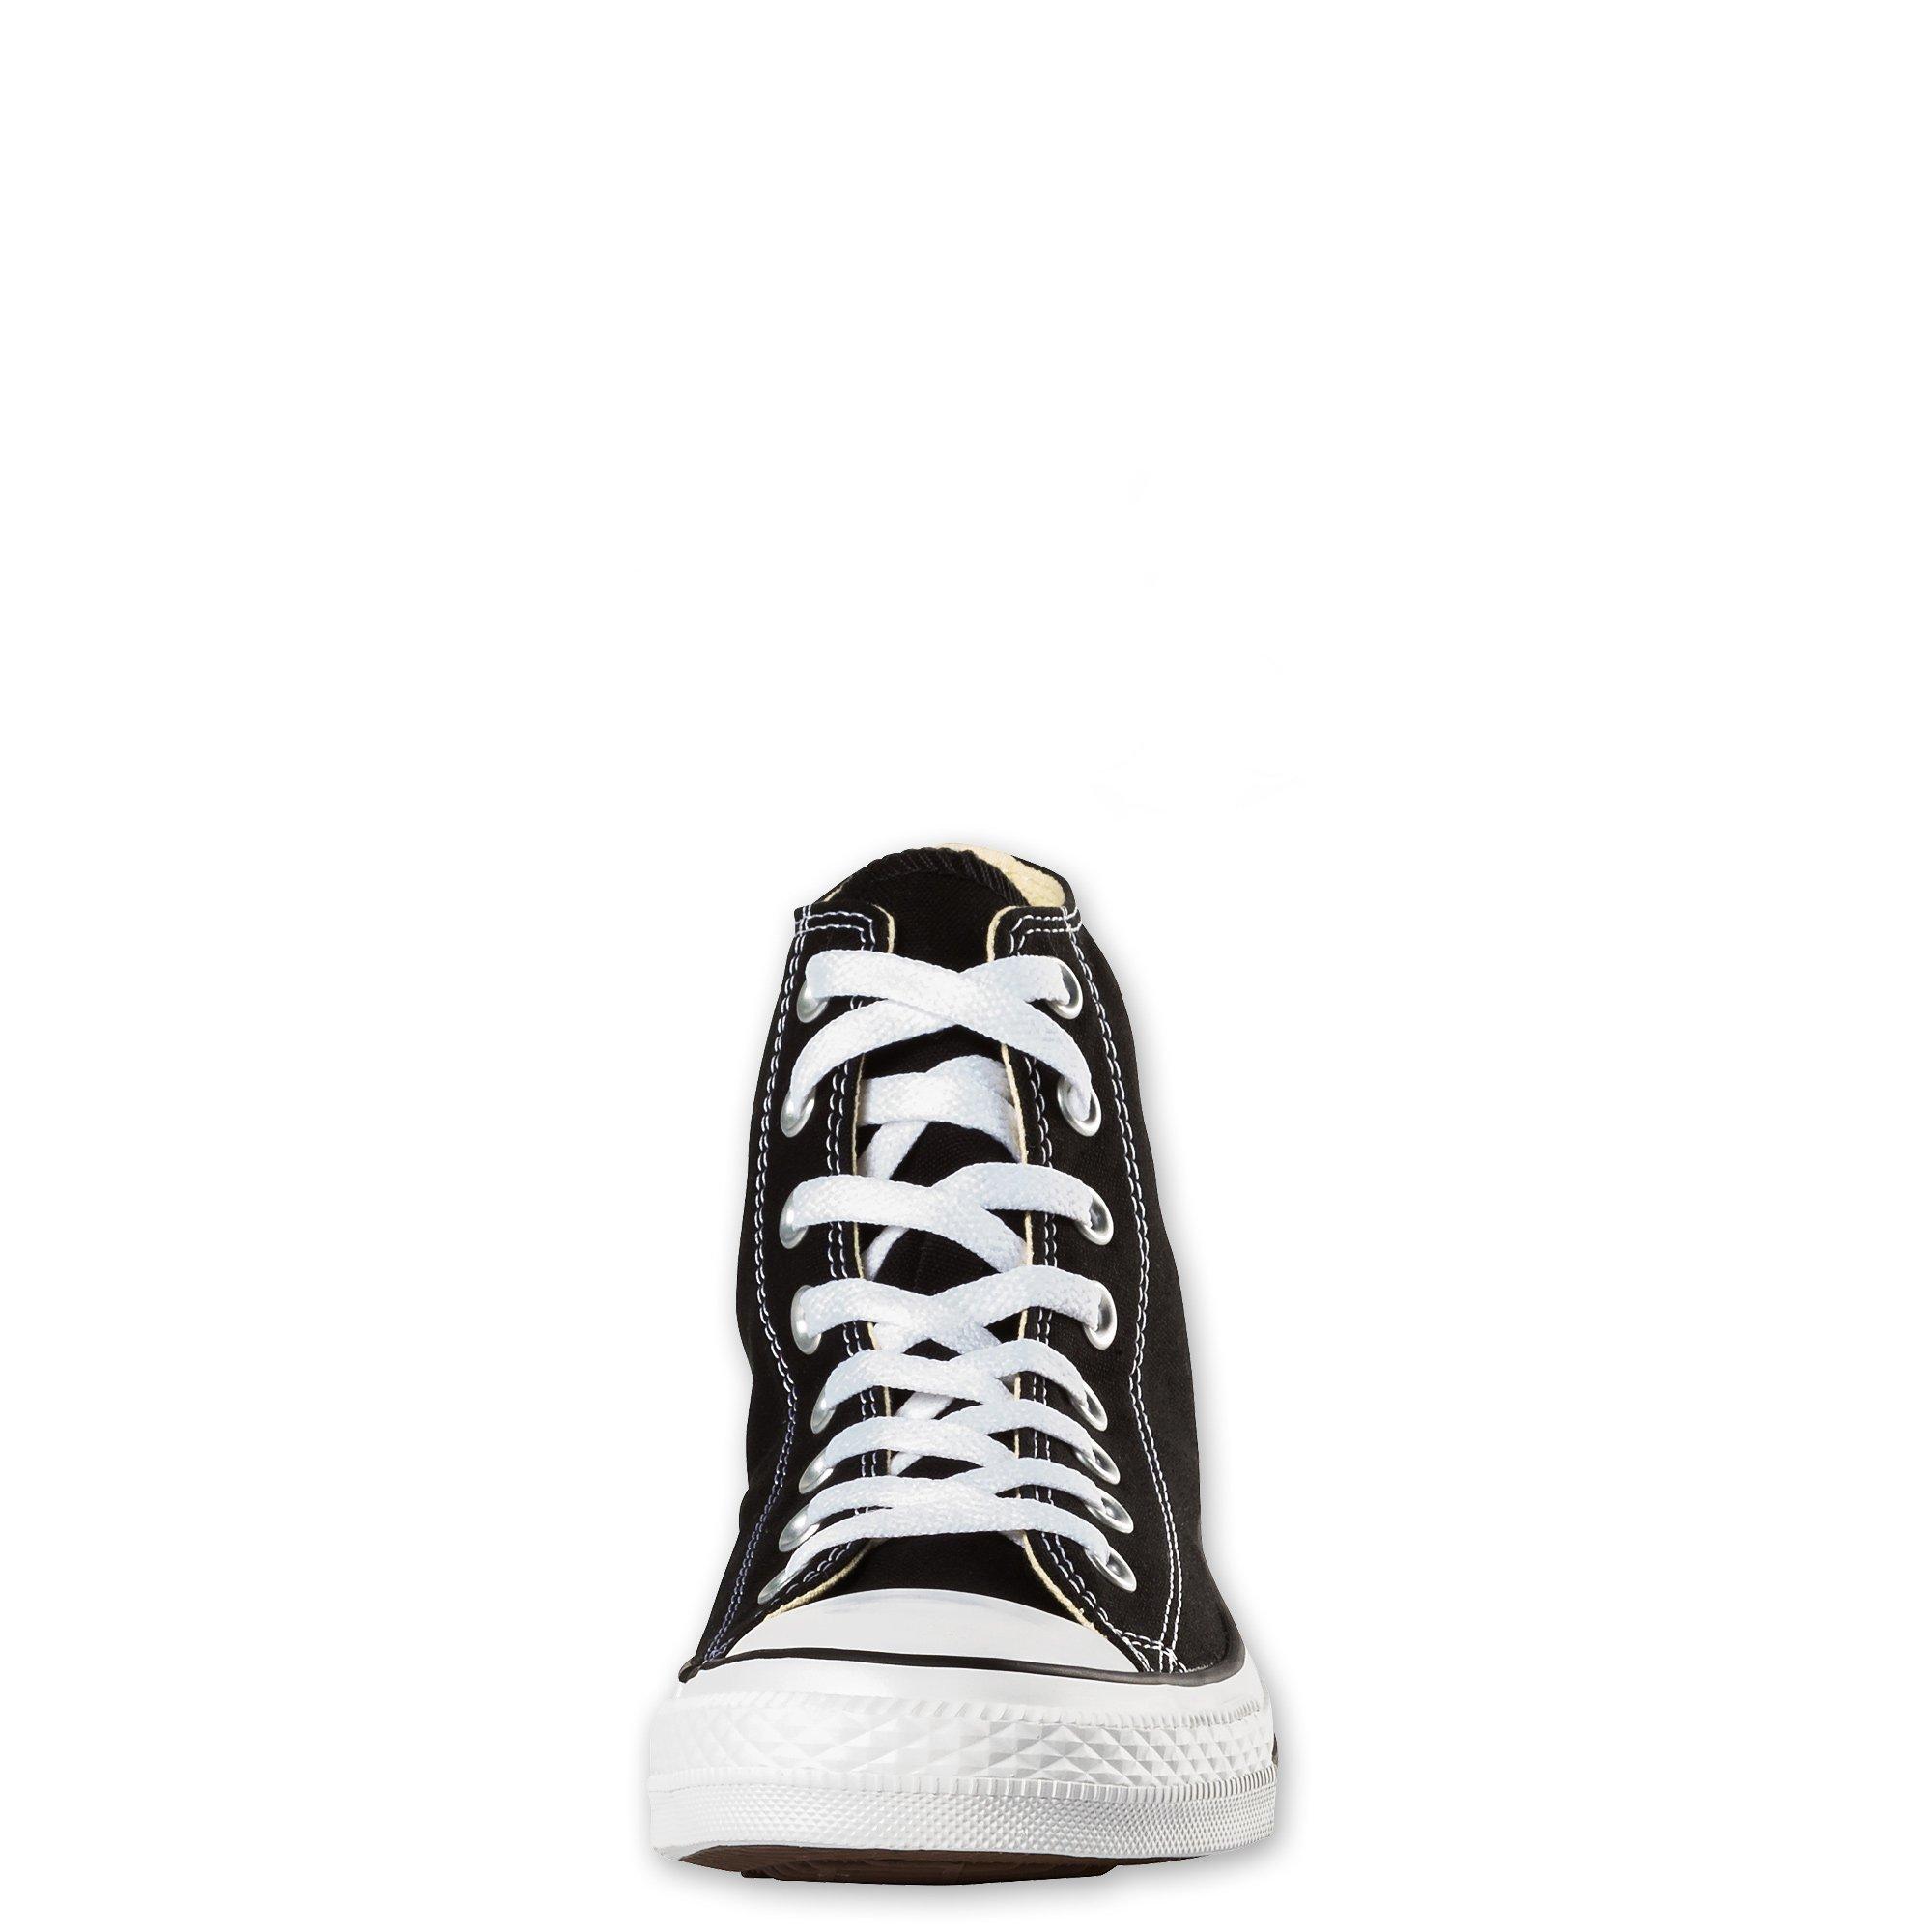 CONVERSE Chuck Taylor All Star Sneakers, High Top 